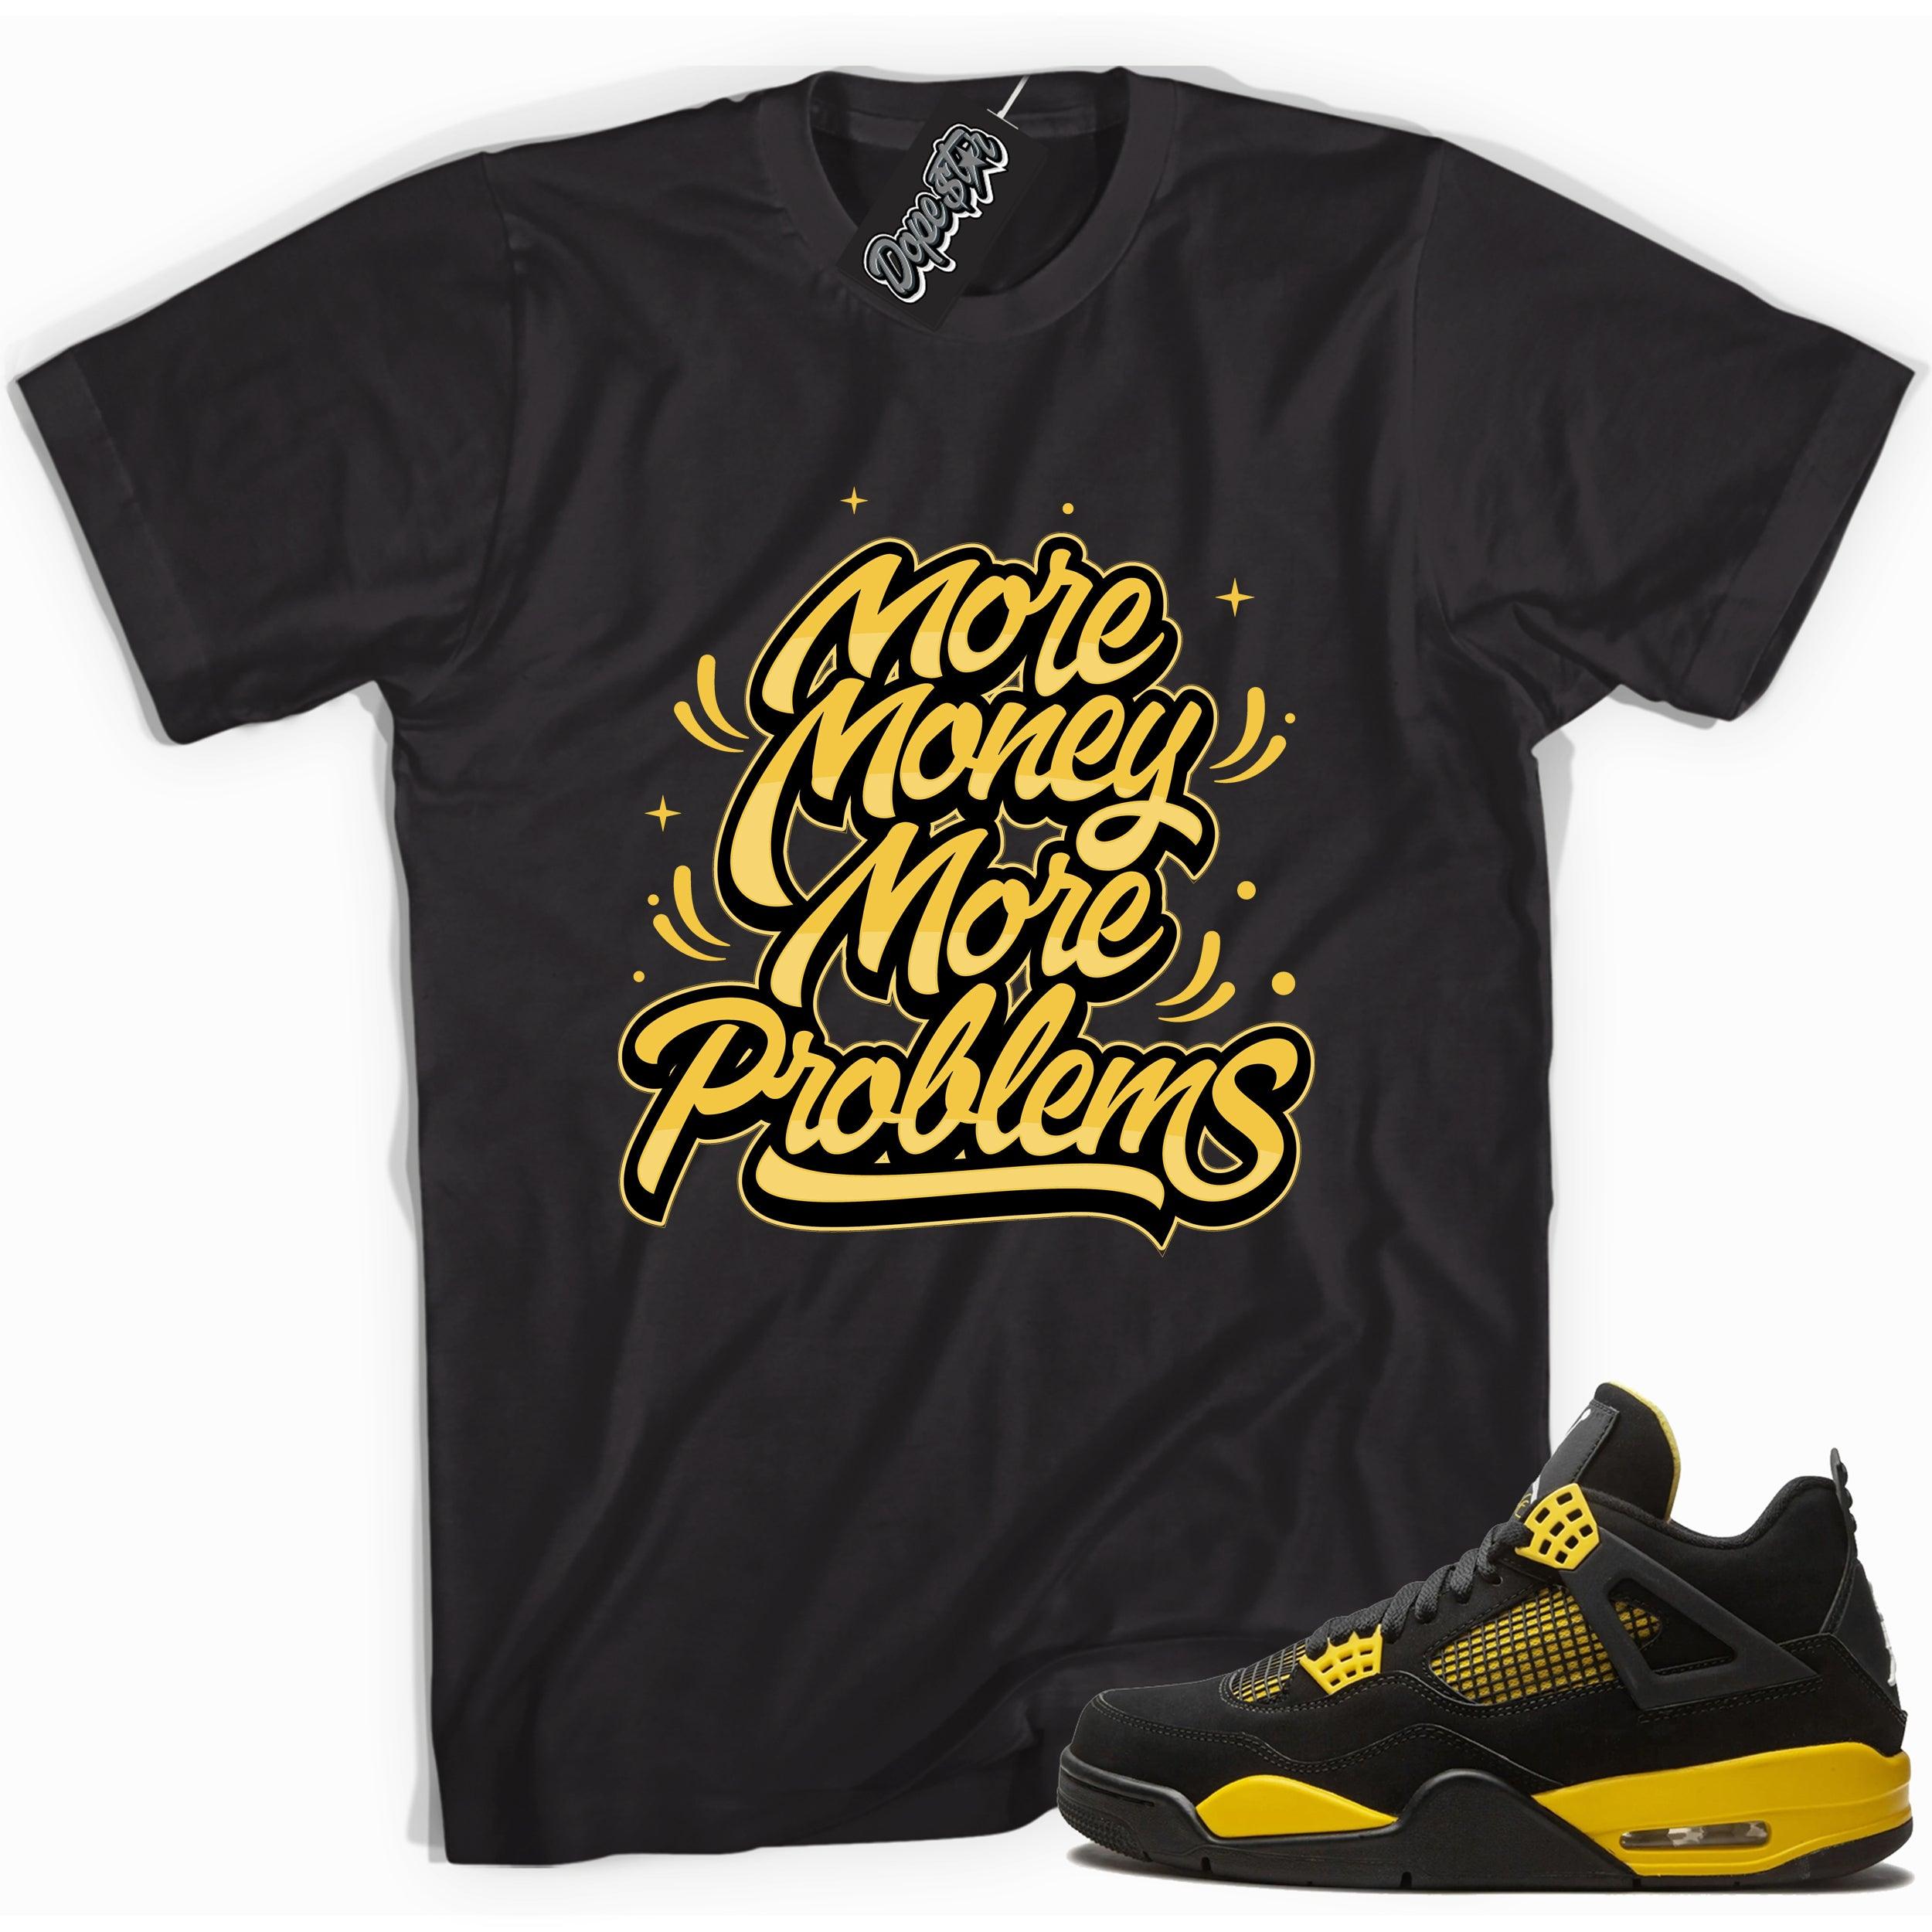 Cool black graphic tee with 'more money more problems' print, that perfectly matches  Air Jordan 4 Thunder sneakers